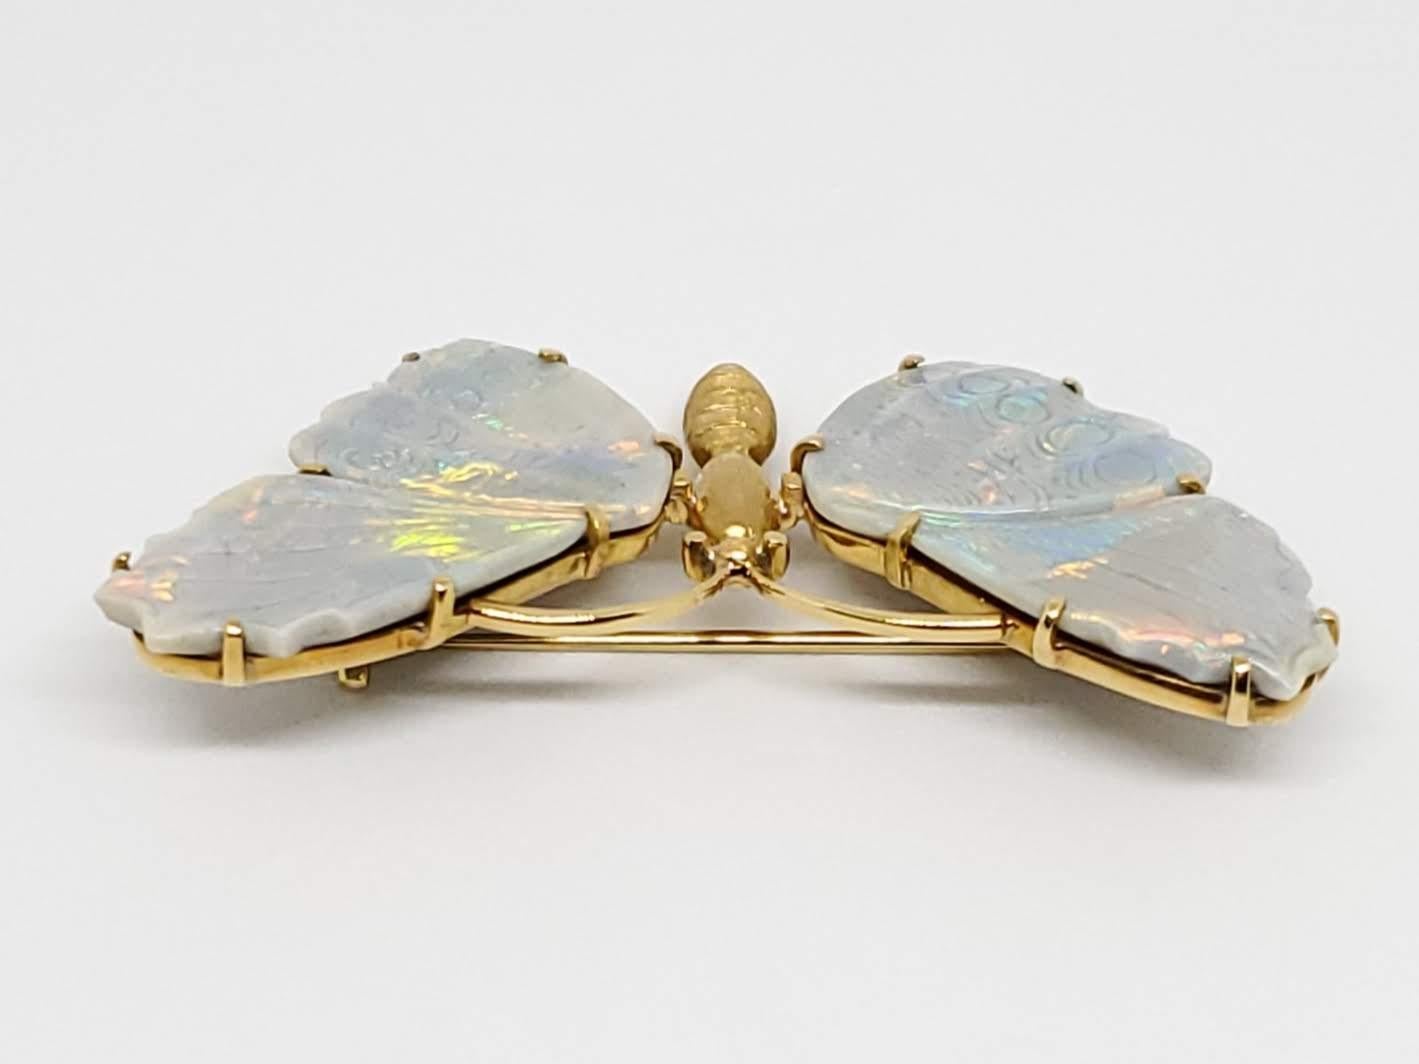 Thanks for taking a look at this truly one of a kind Burle Marx Butterfly Brooch. You'll never see another one like it, anywhere. It is 2.50 inches wide, and 1.50 inches tall. 

Burle Marx, without question, will go down in history as one the